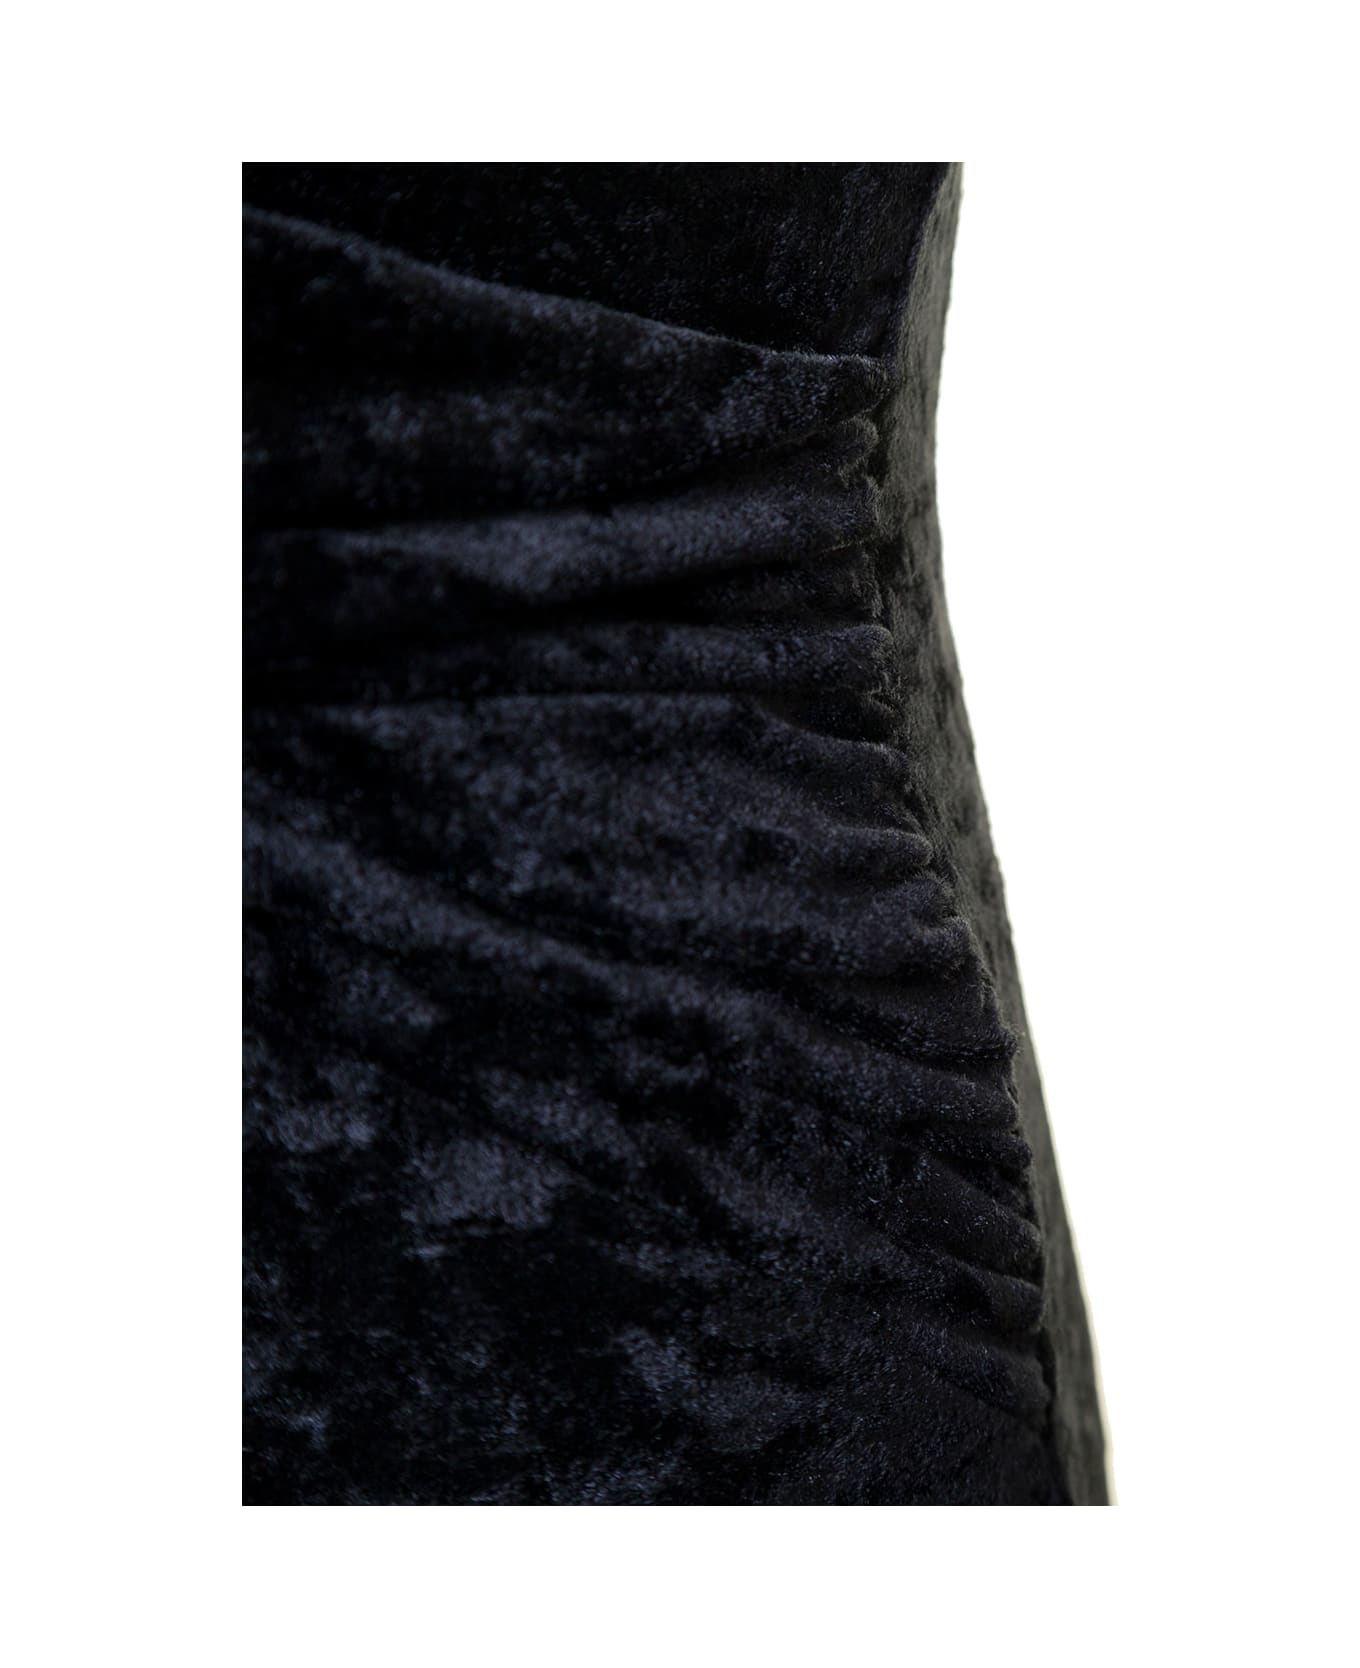 The Andamane 'naomi' Blue Hooded Flared Jumpsuit In Crushed Velvet Woman - Black